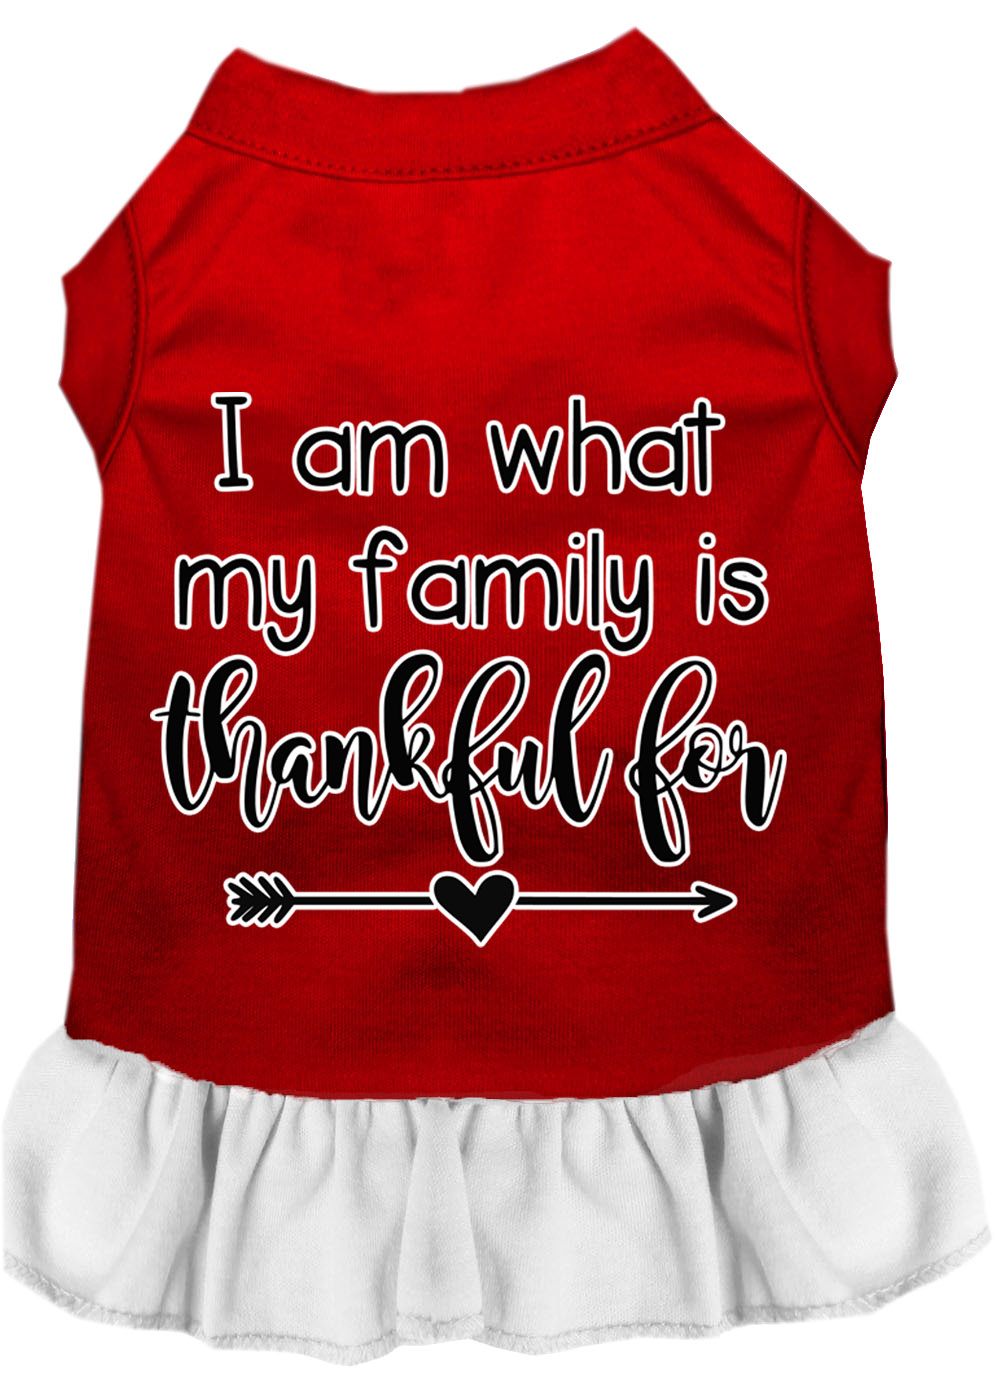 I Am What My Family is Thankful For Screen Print Dog Dress Red with White XL